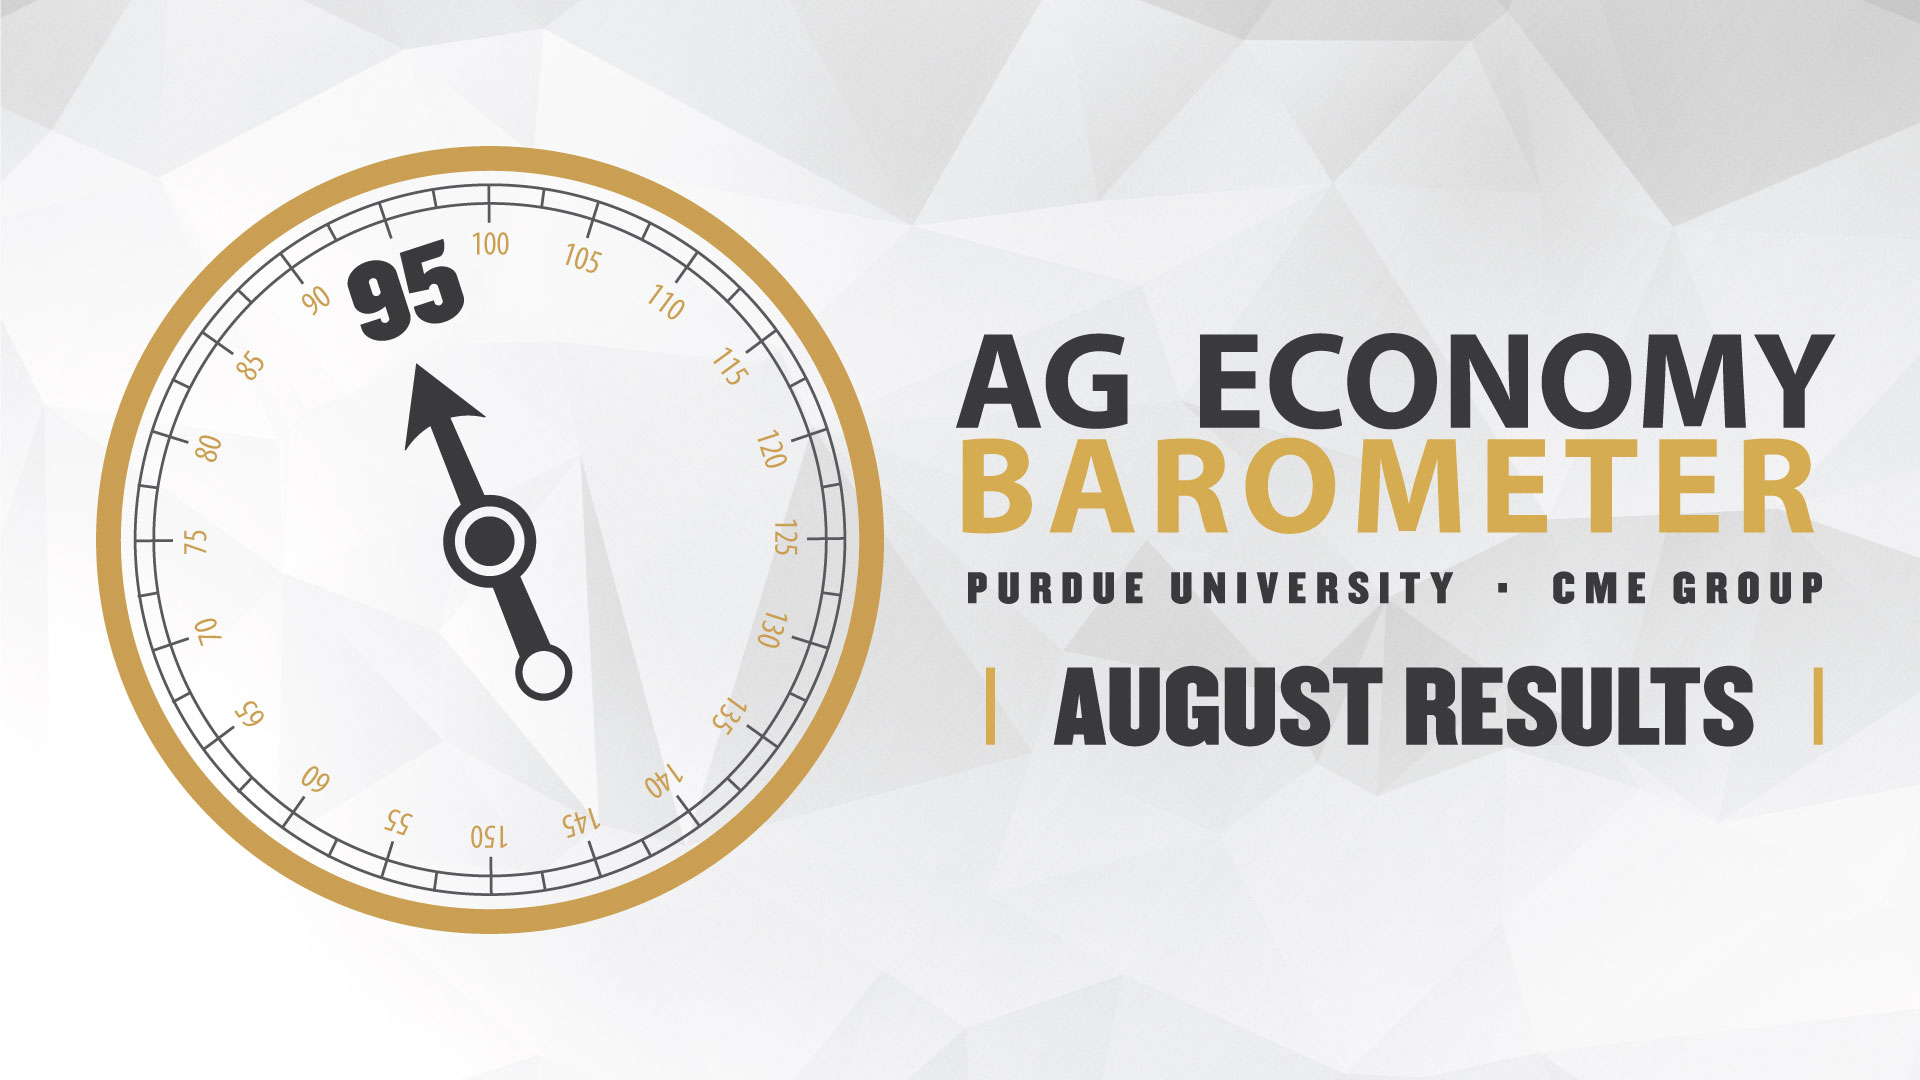 Farmer Sentiment on Trade and the Overall Ag Economy Improves as Fall Harvest Gets Underway